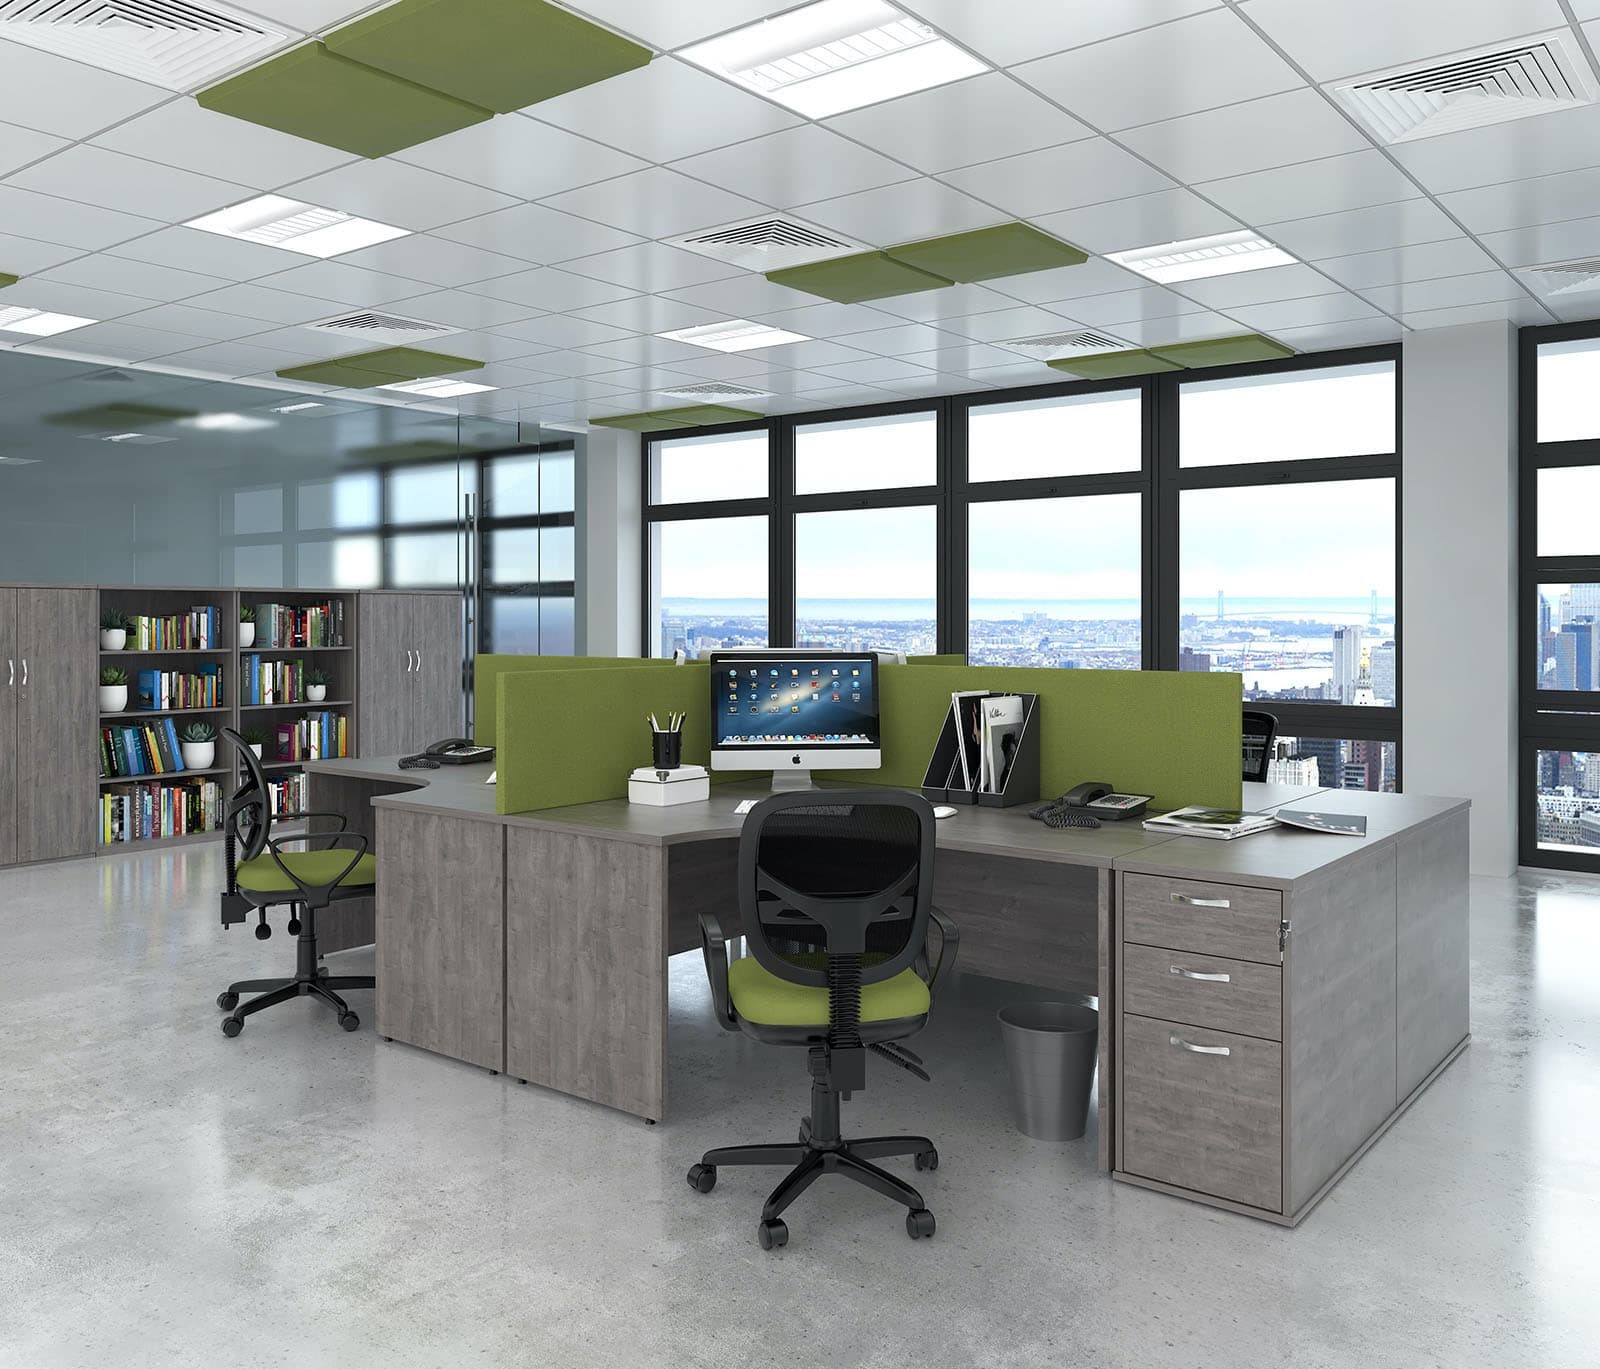 Main image for Mike O Dwyer Office Furniture Limited